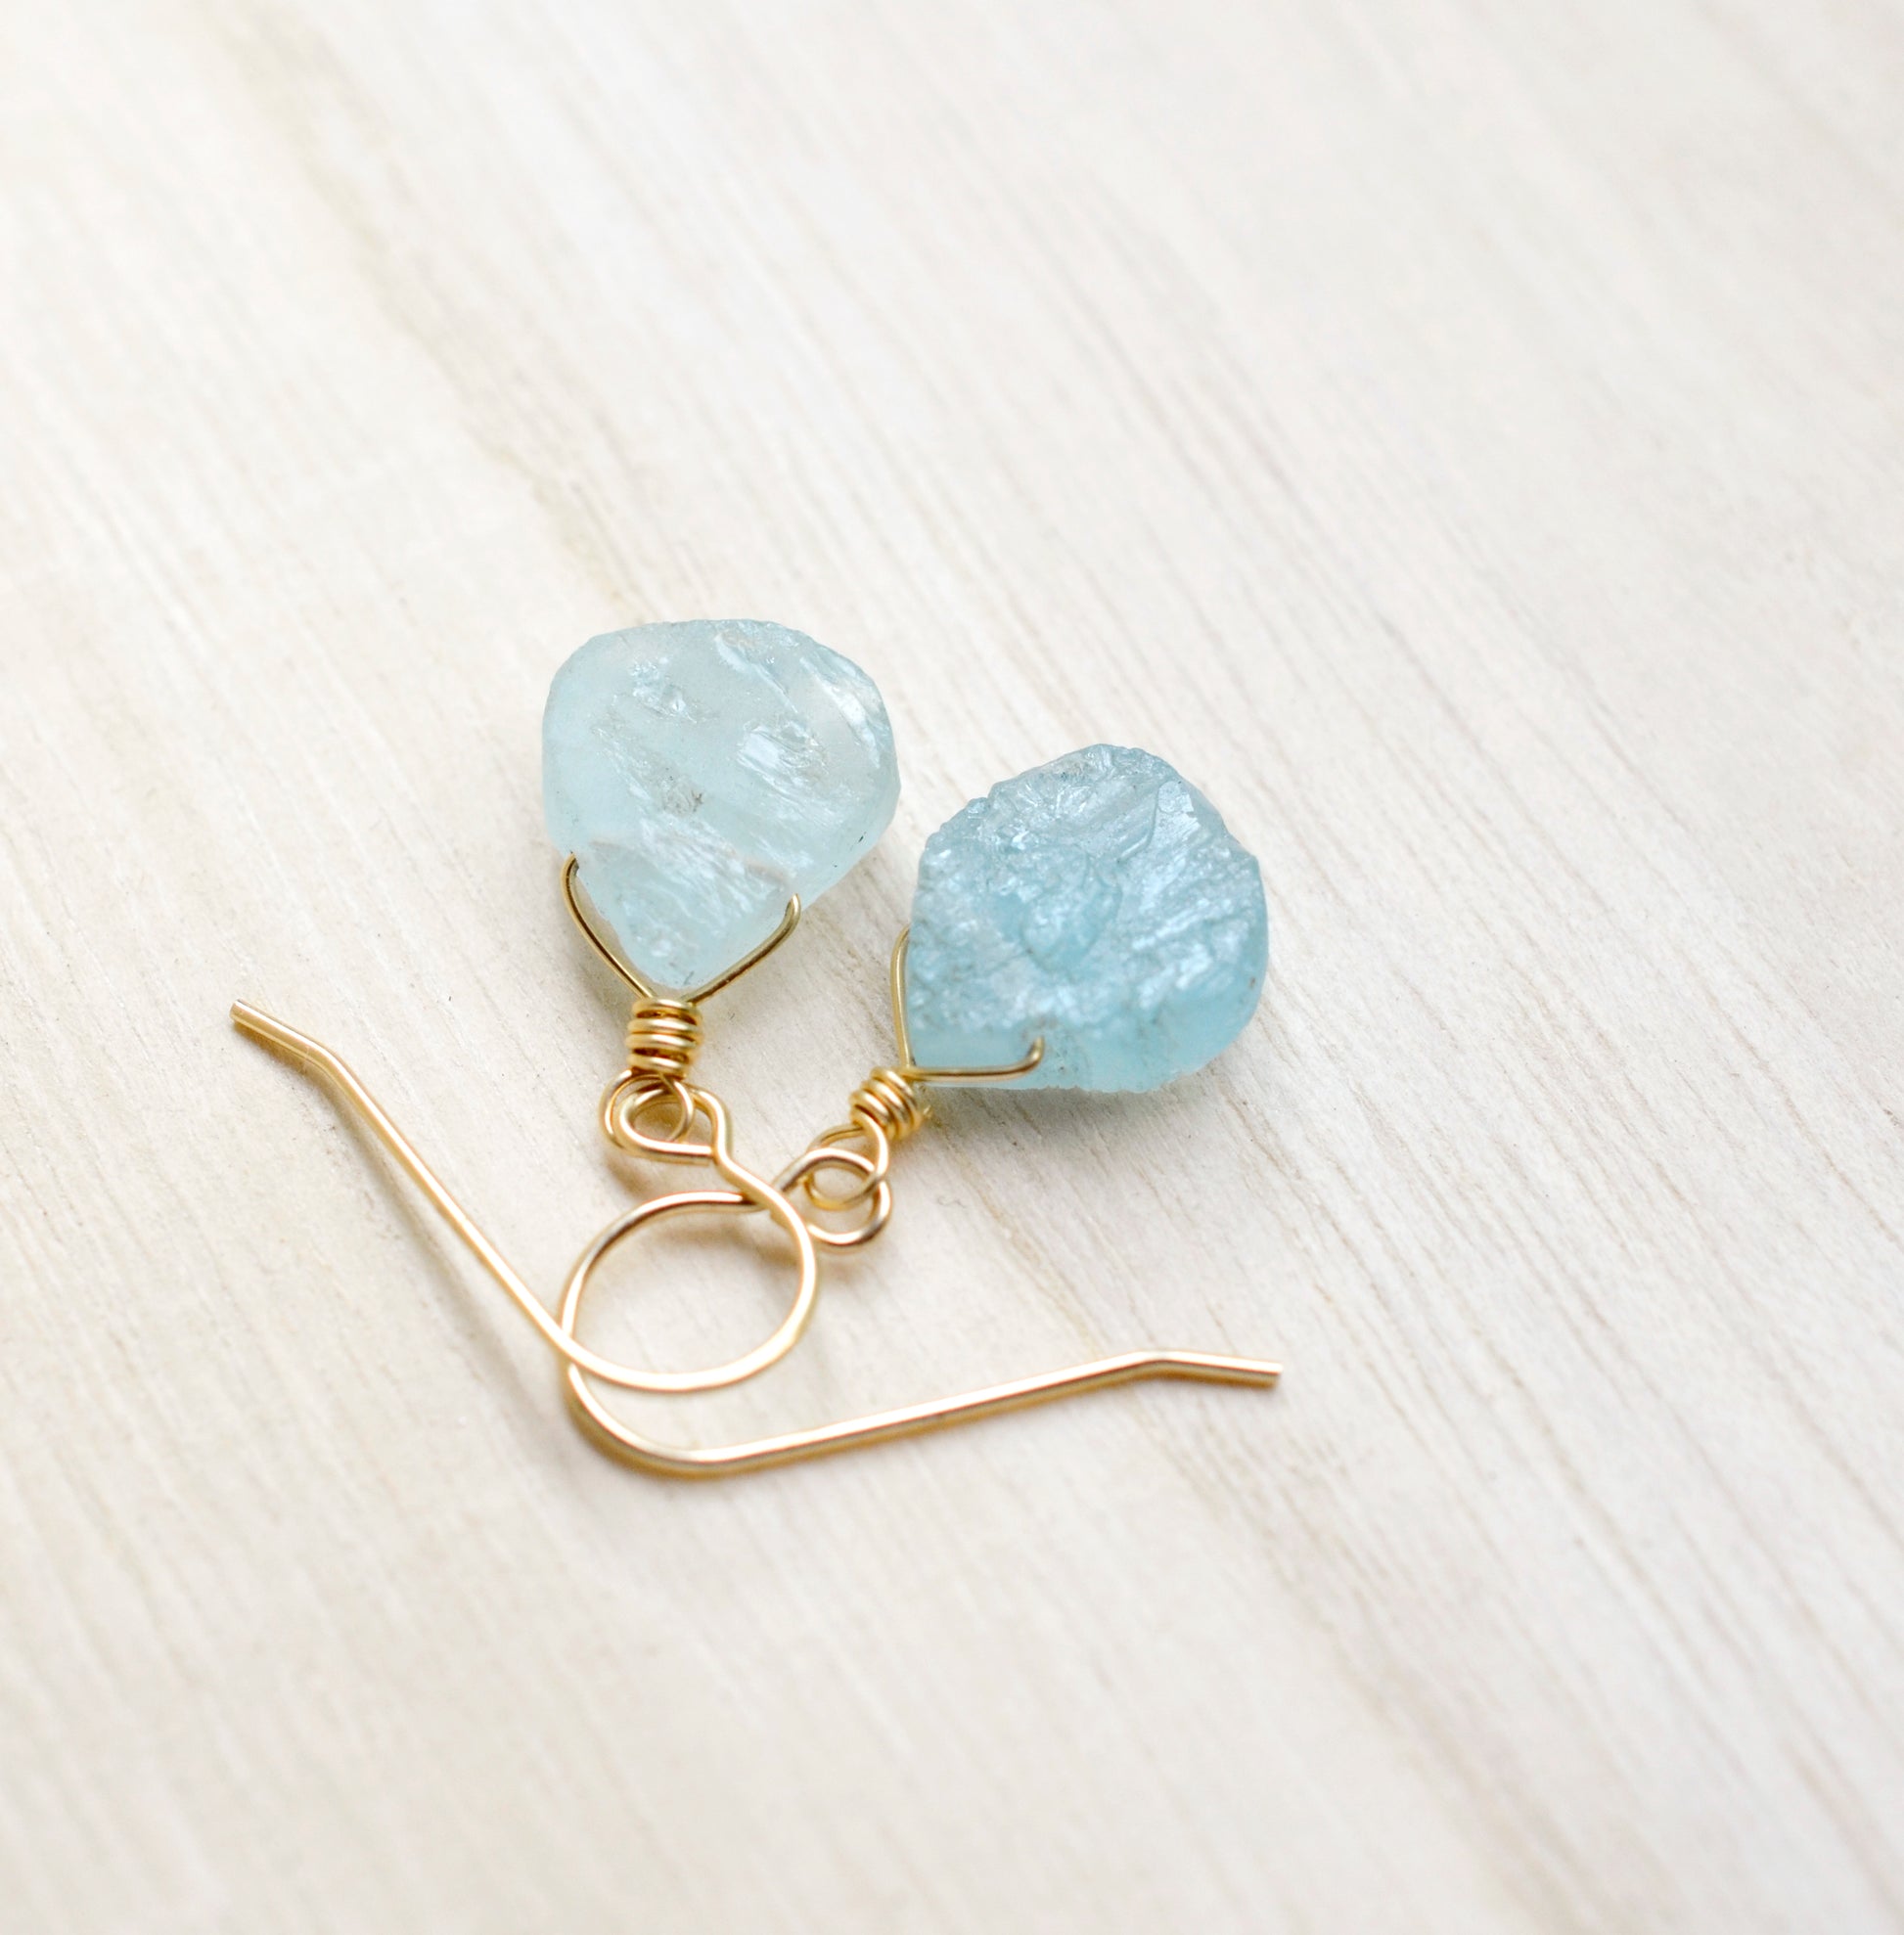 Aquamarine Earrings, Natural Raw Aquamarine Crystal Dangles, Sterling Silver or 14k Gold Filled, March Birthstone Jewelry, Something Blue Wedding